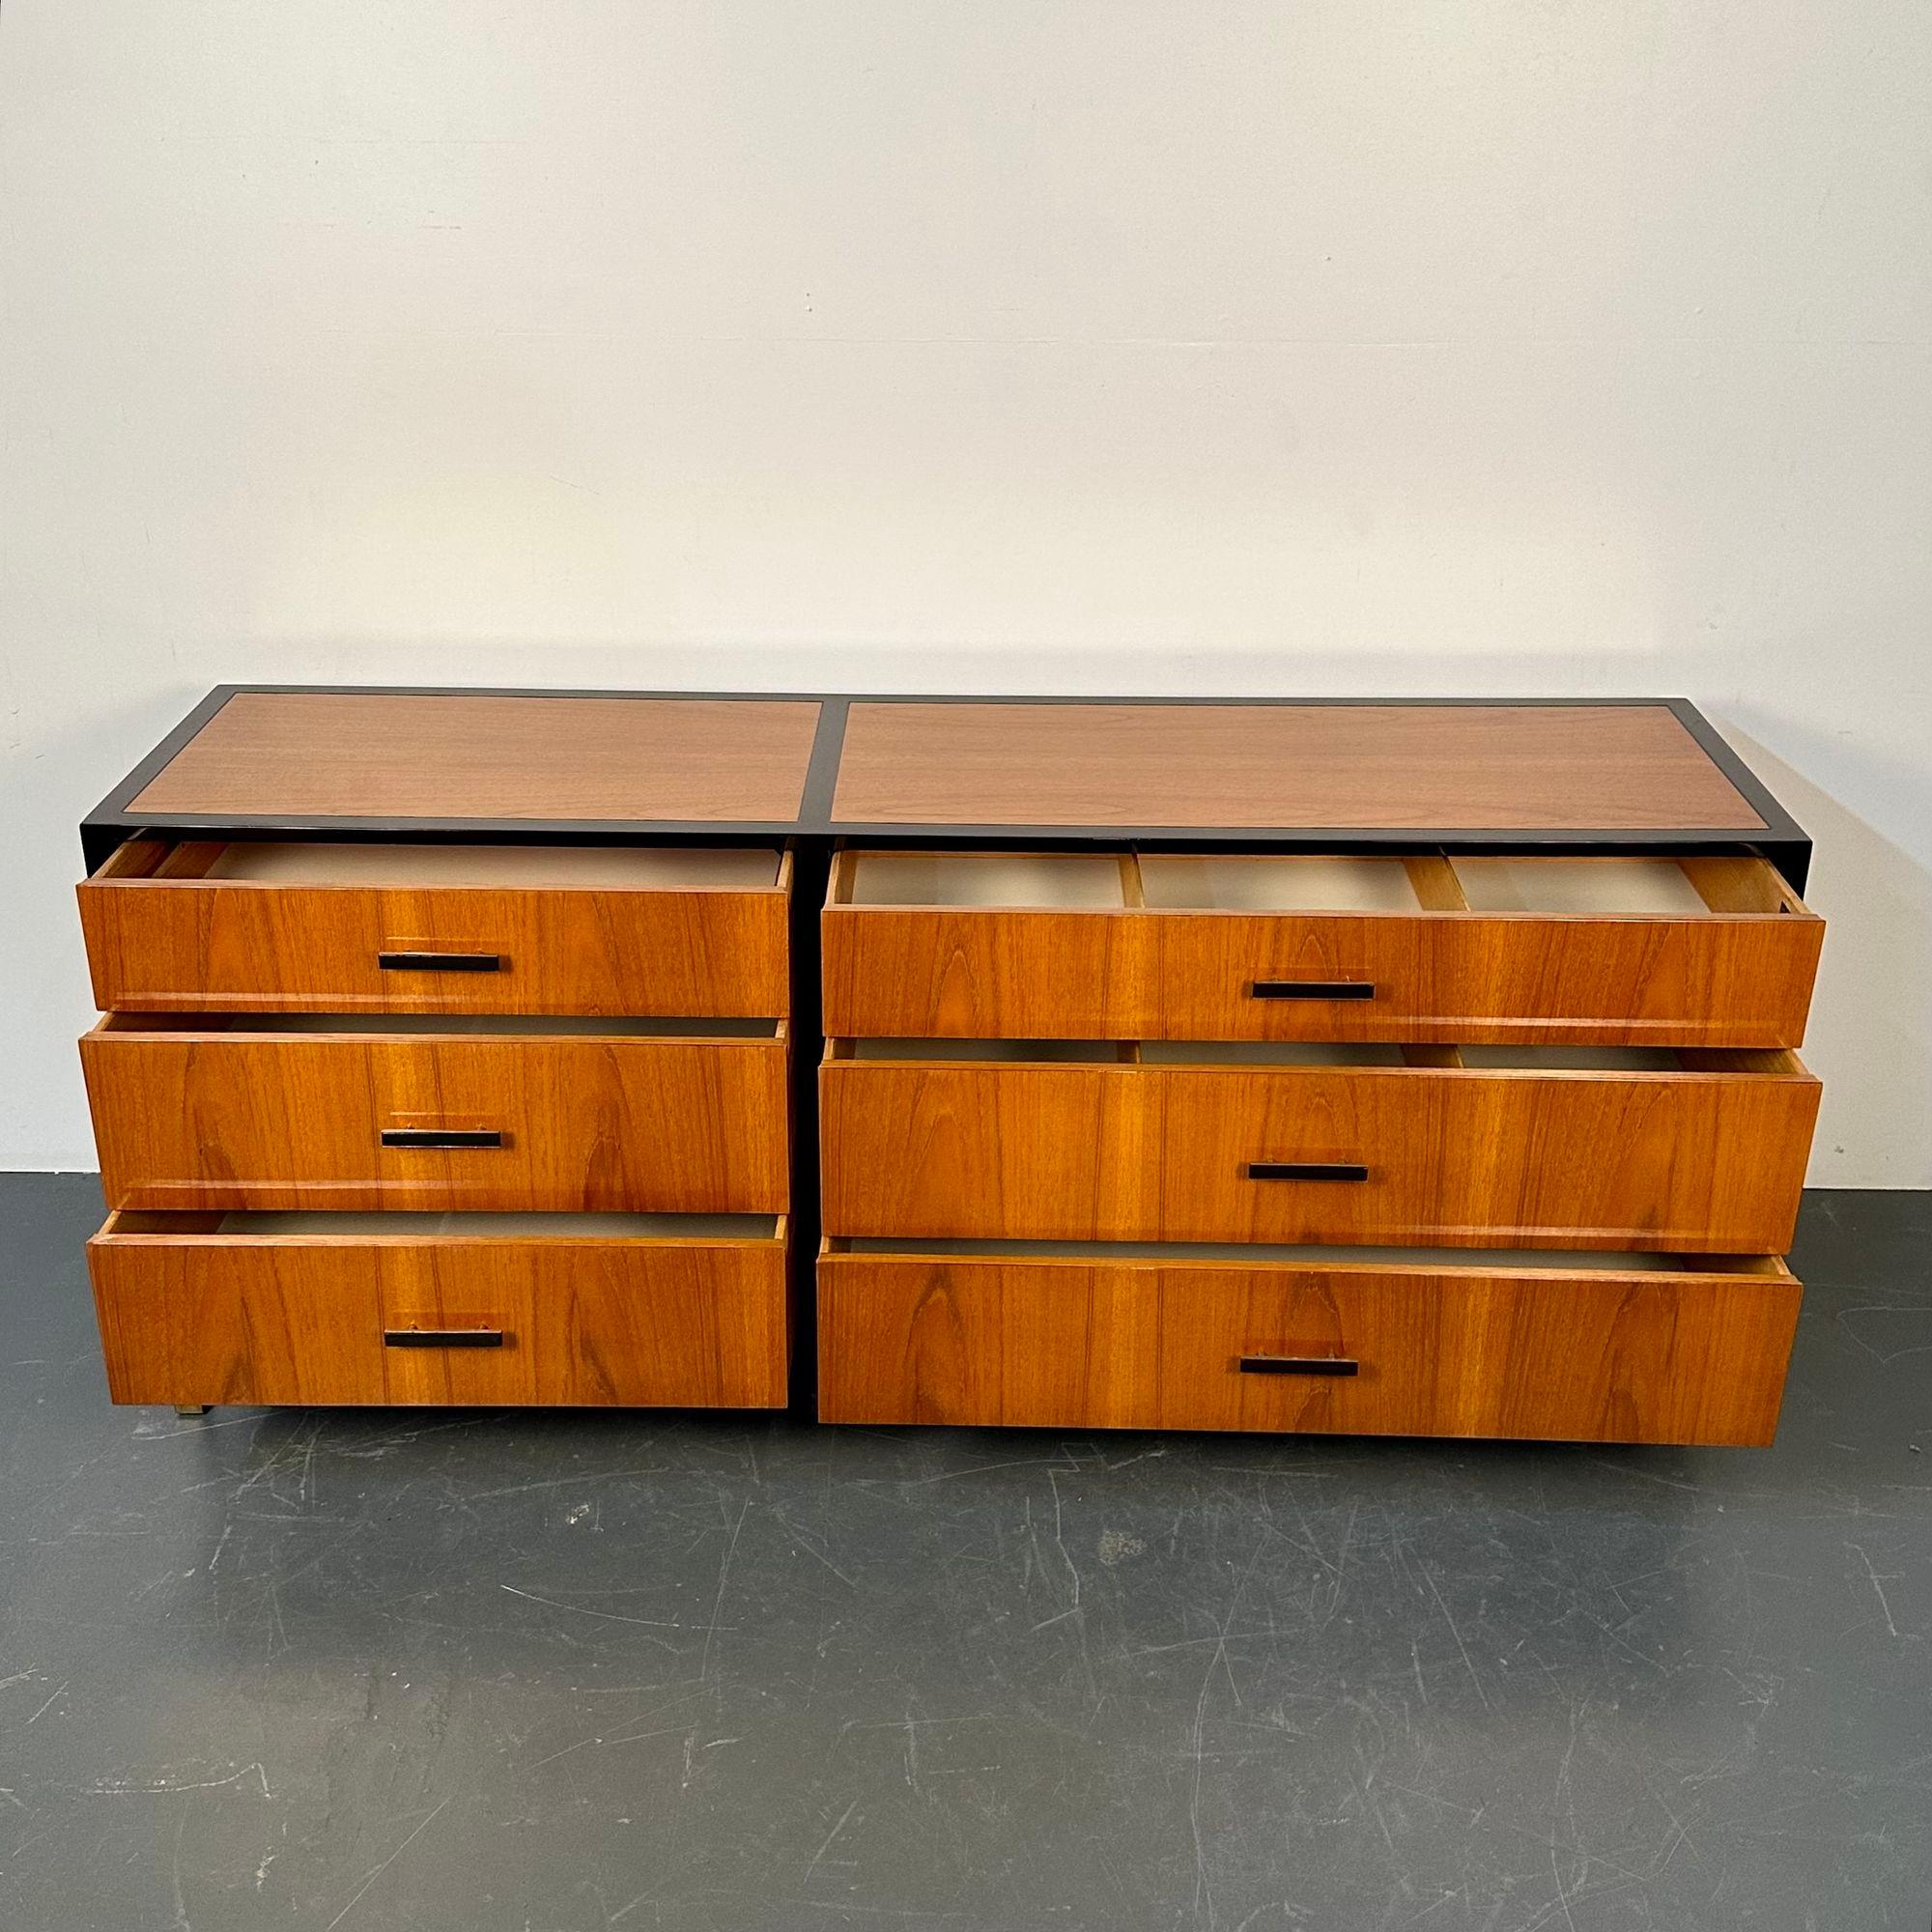 American Mid-Century Modern Rosewood Dresser / Sideboard by Harvey Probber 1960s For Sale 4